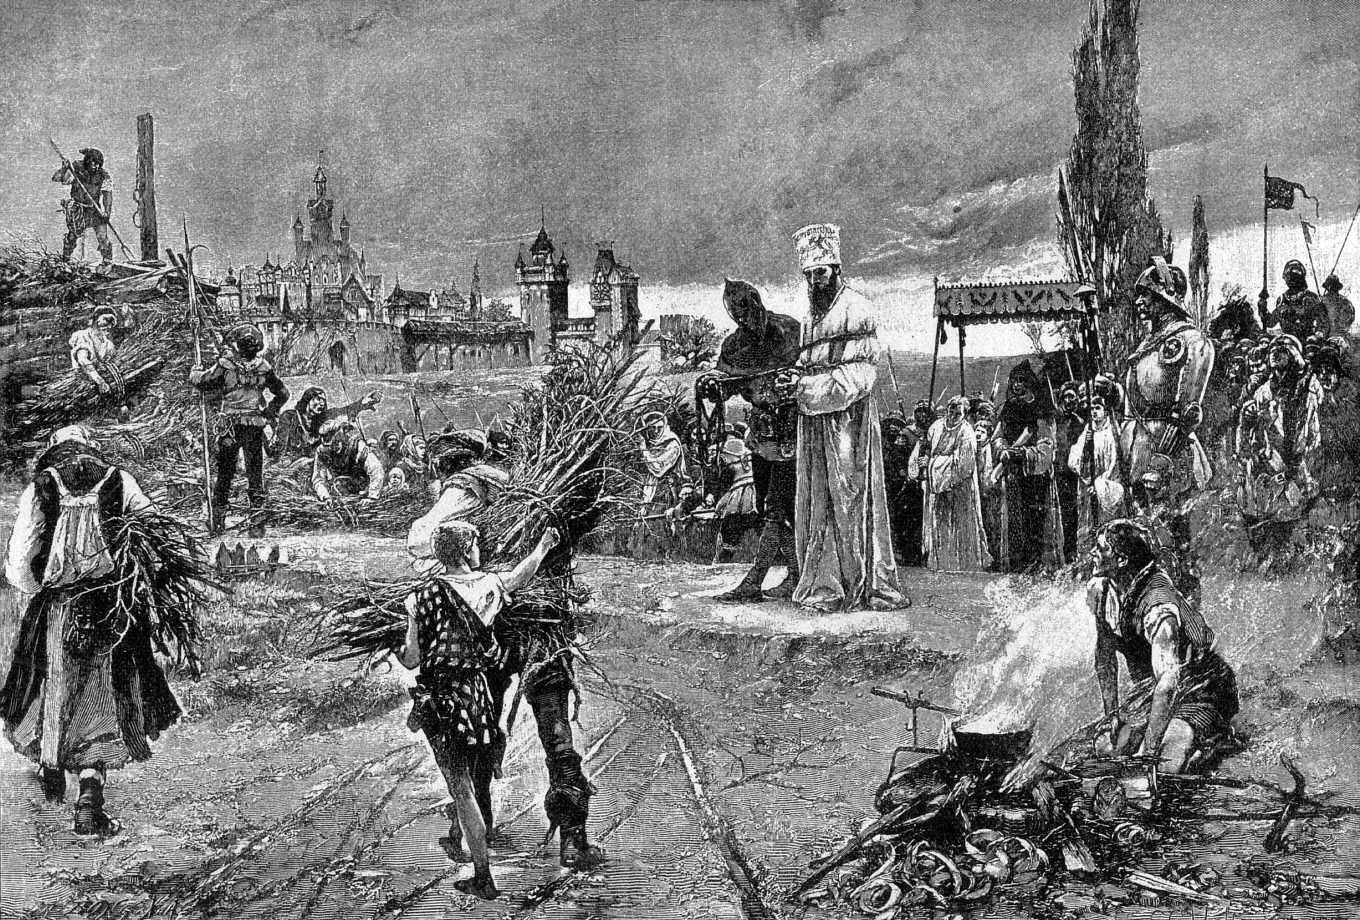 Executioners prepare to burn dissident Czech Catholic priest Jan Hus at the stake in 1415 AD.